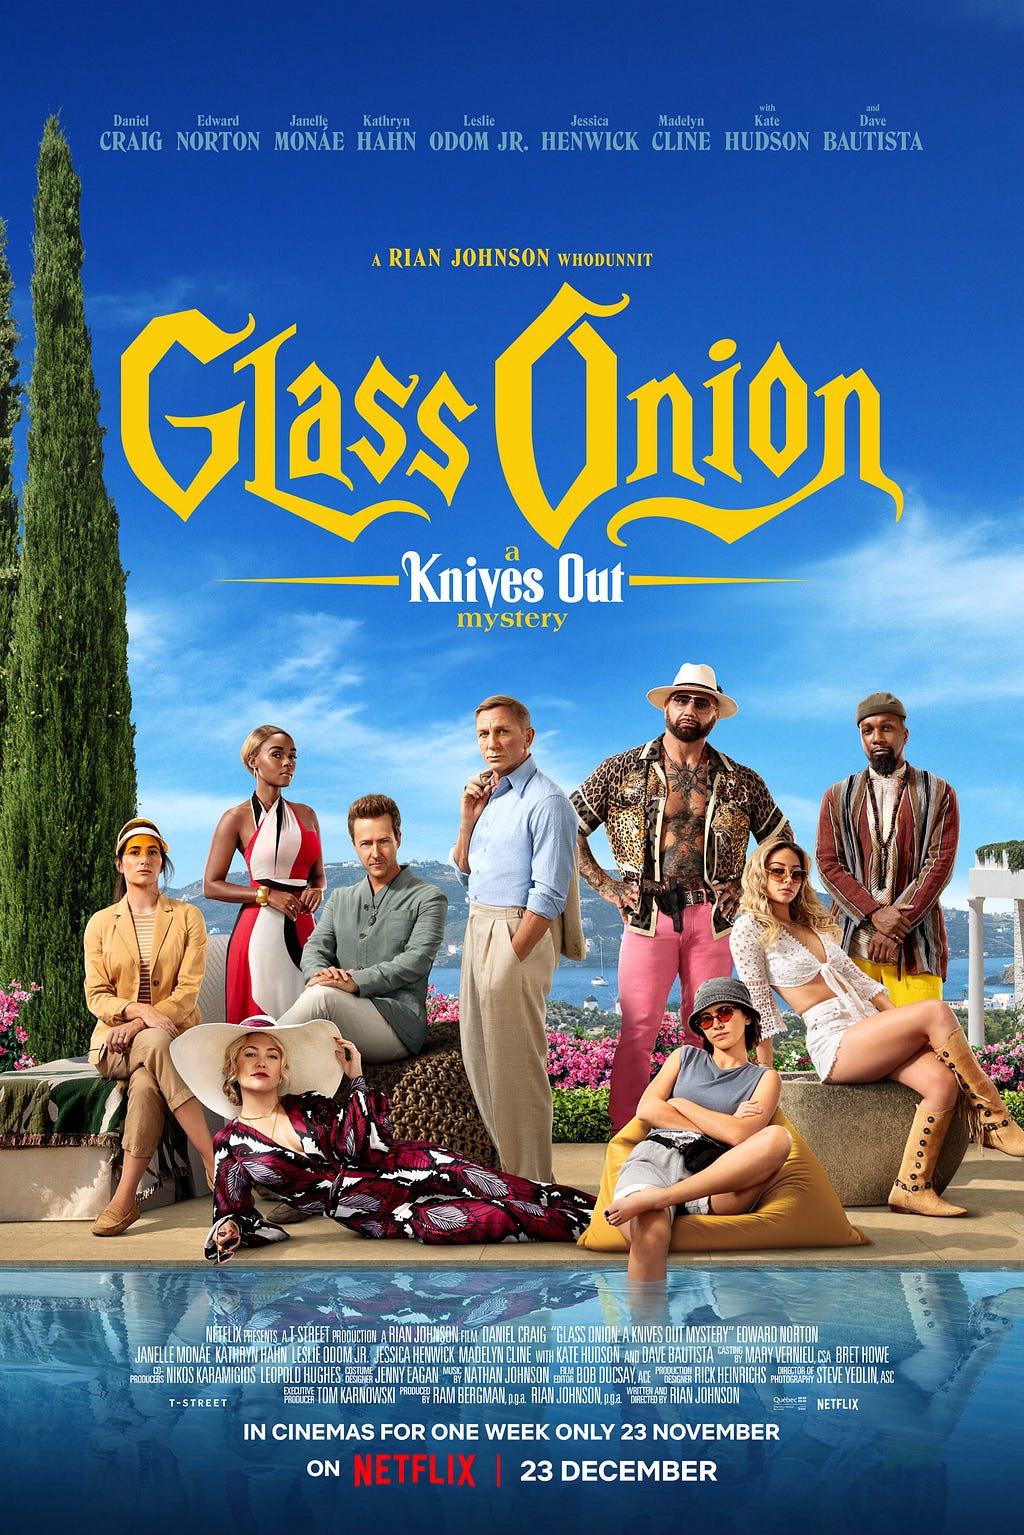 The cast poster for “Glass Onion: A Knives Out Mystery”